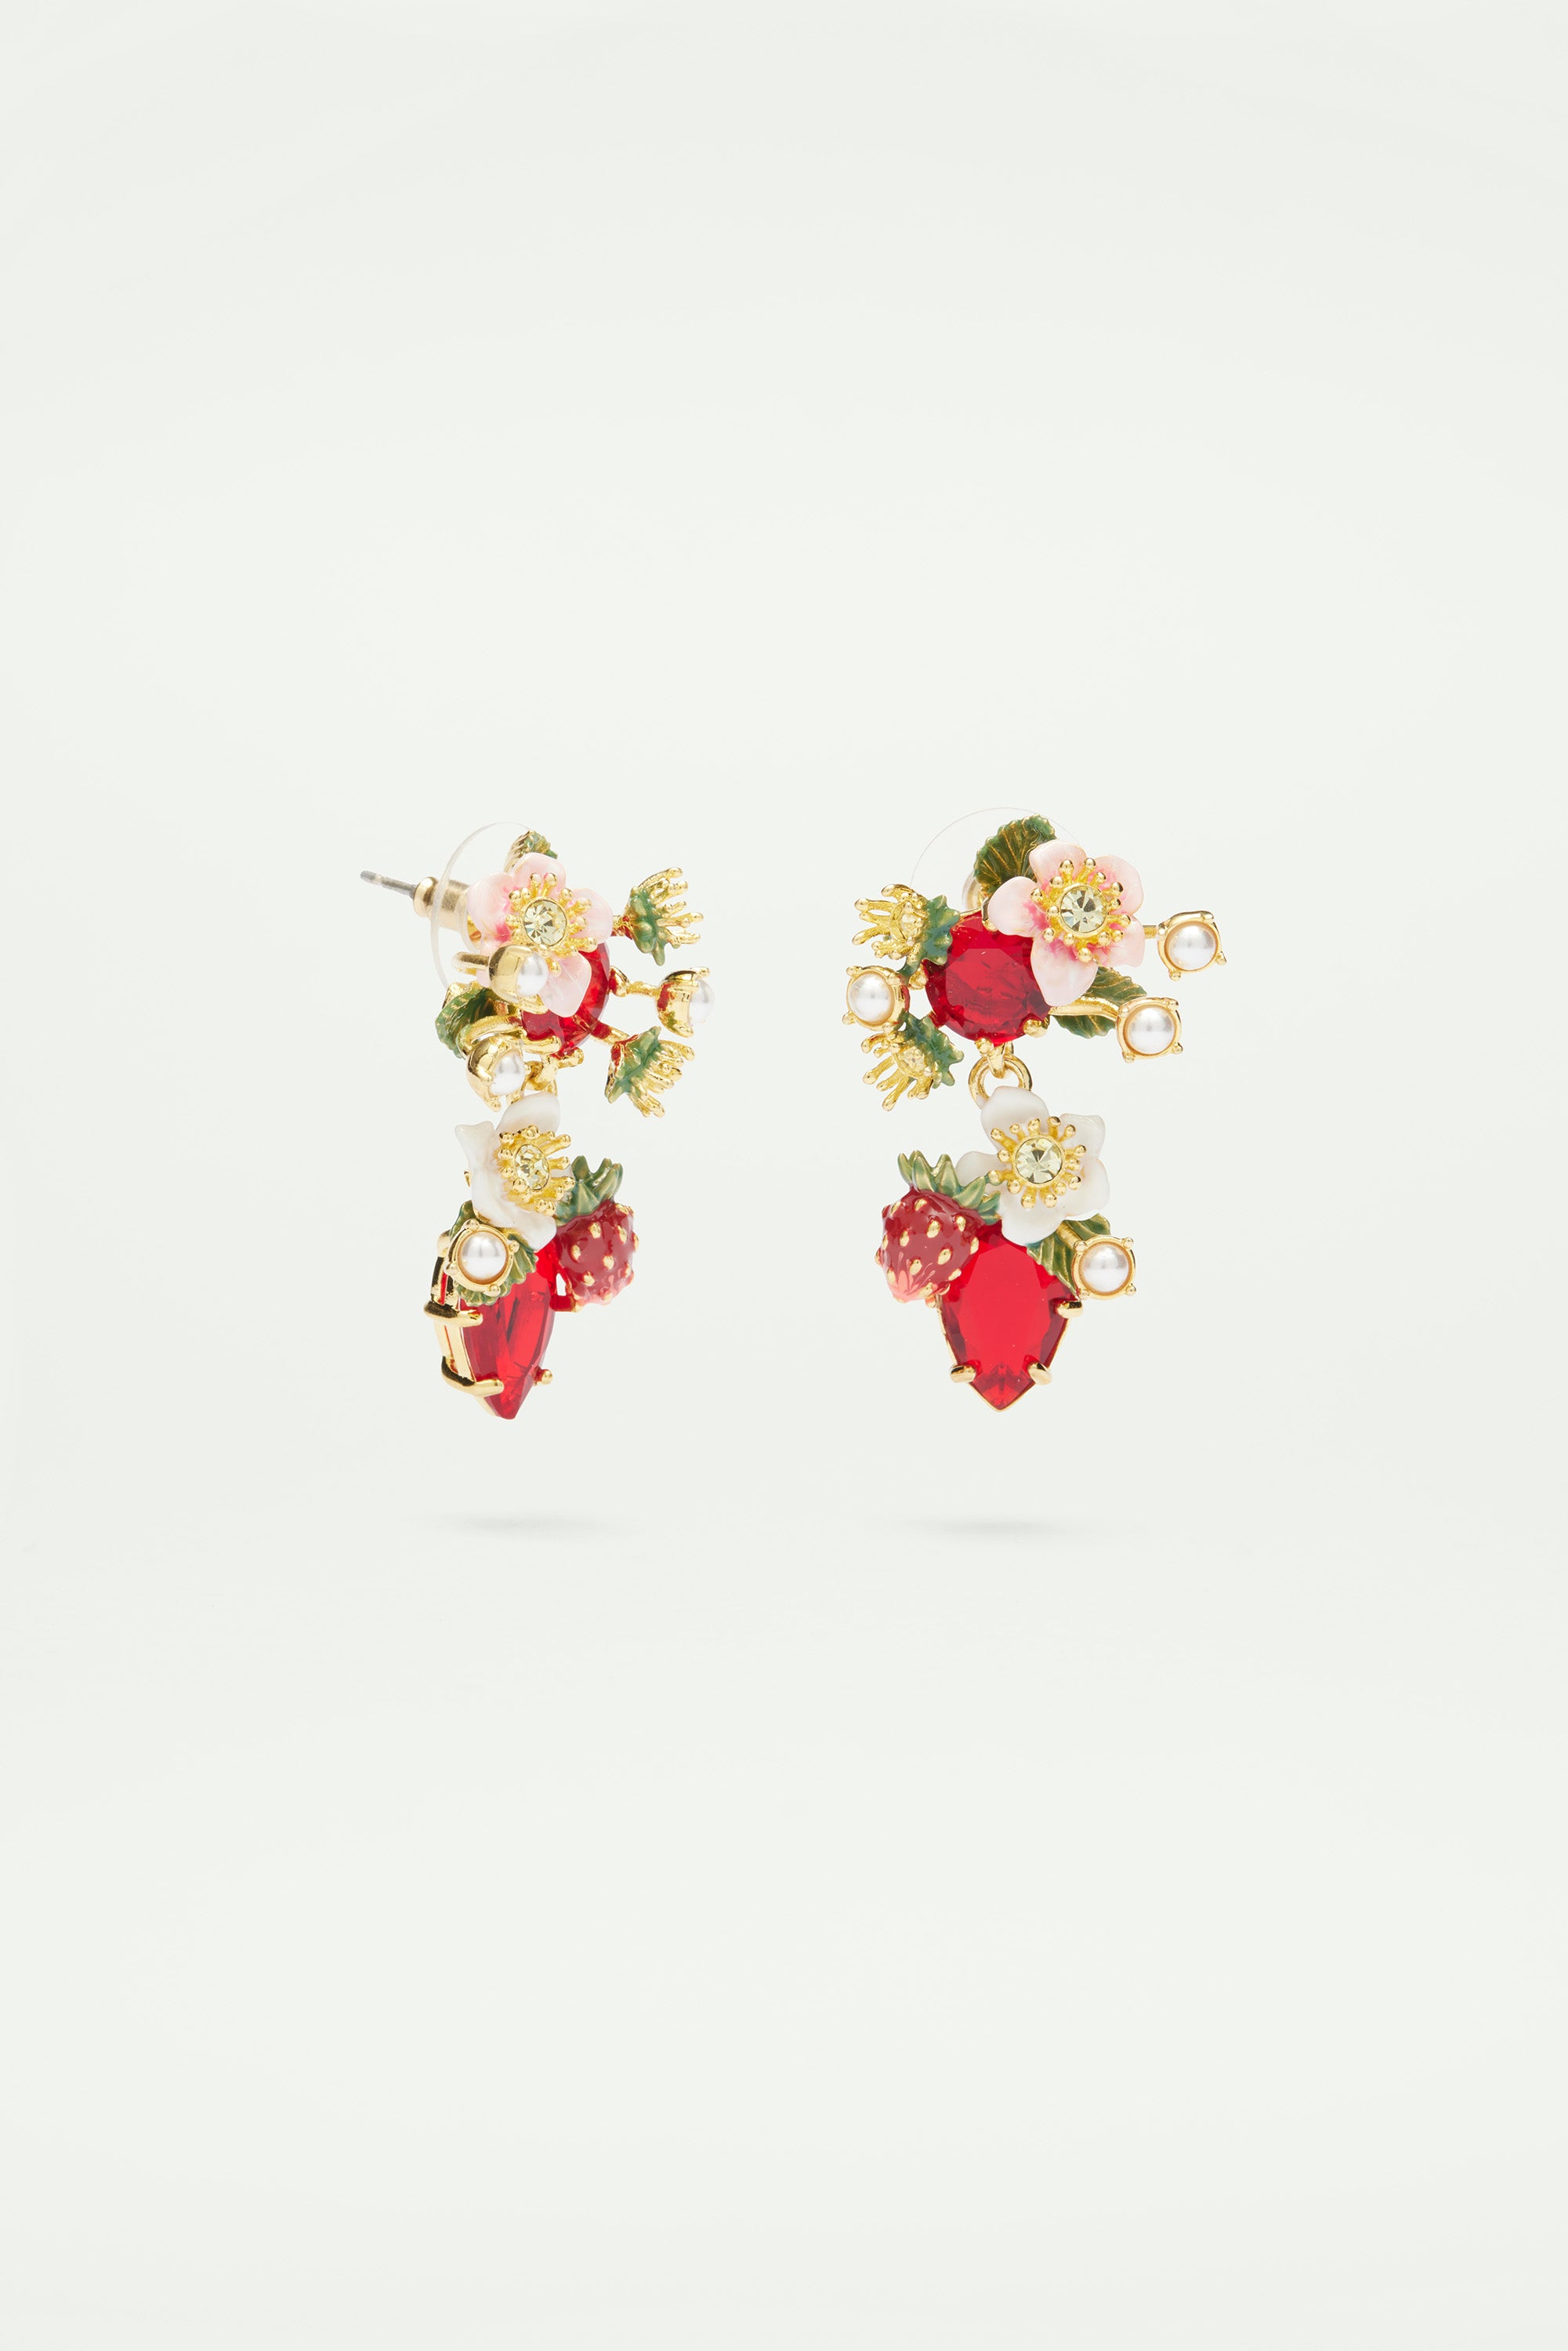 Wild strawberry and strawberry flower post earrings